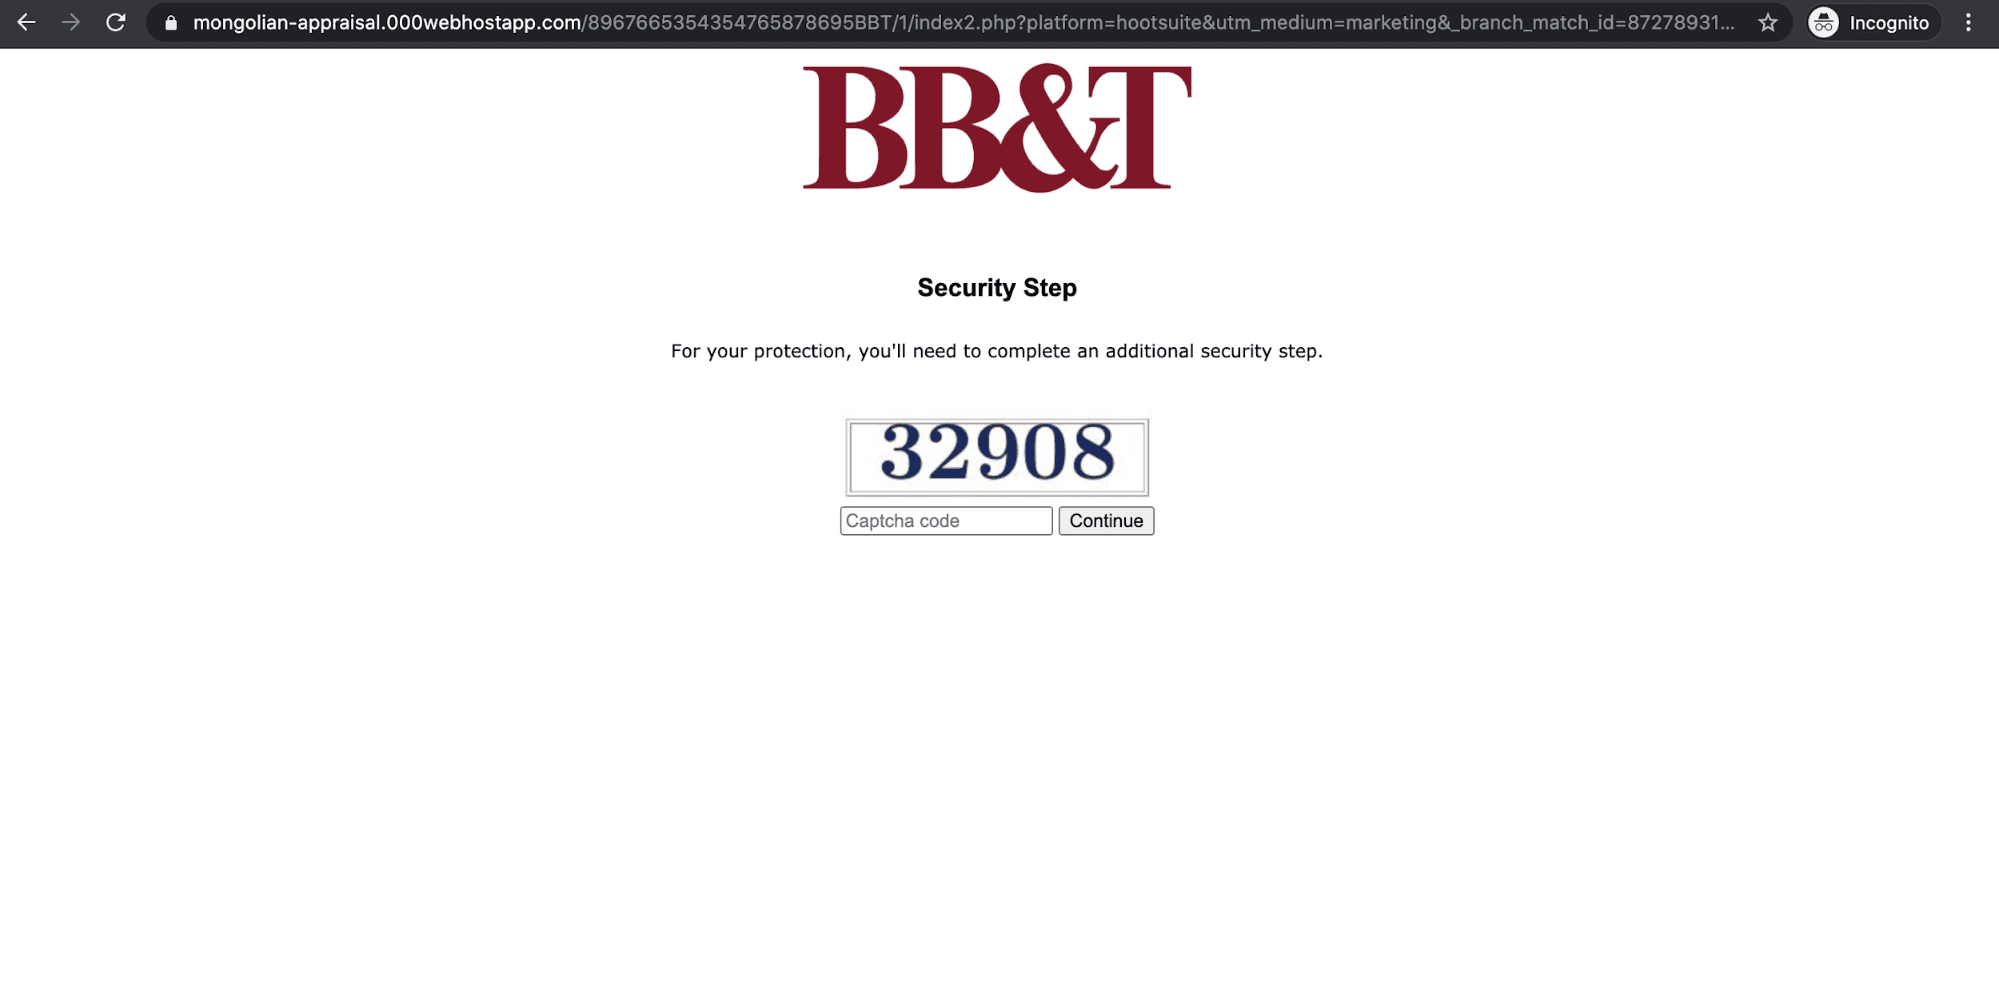 BB&T phishing attempt security step